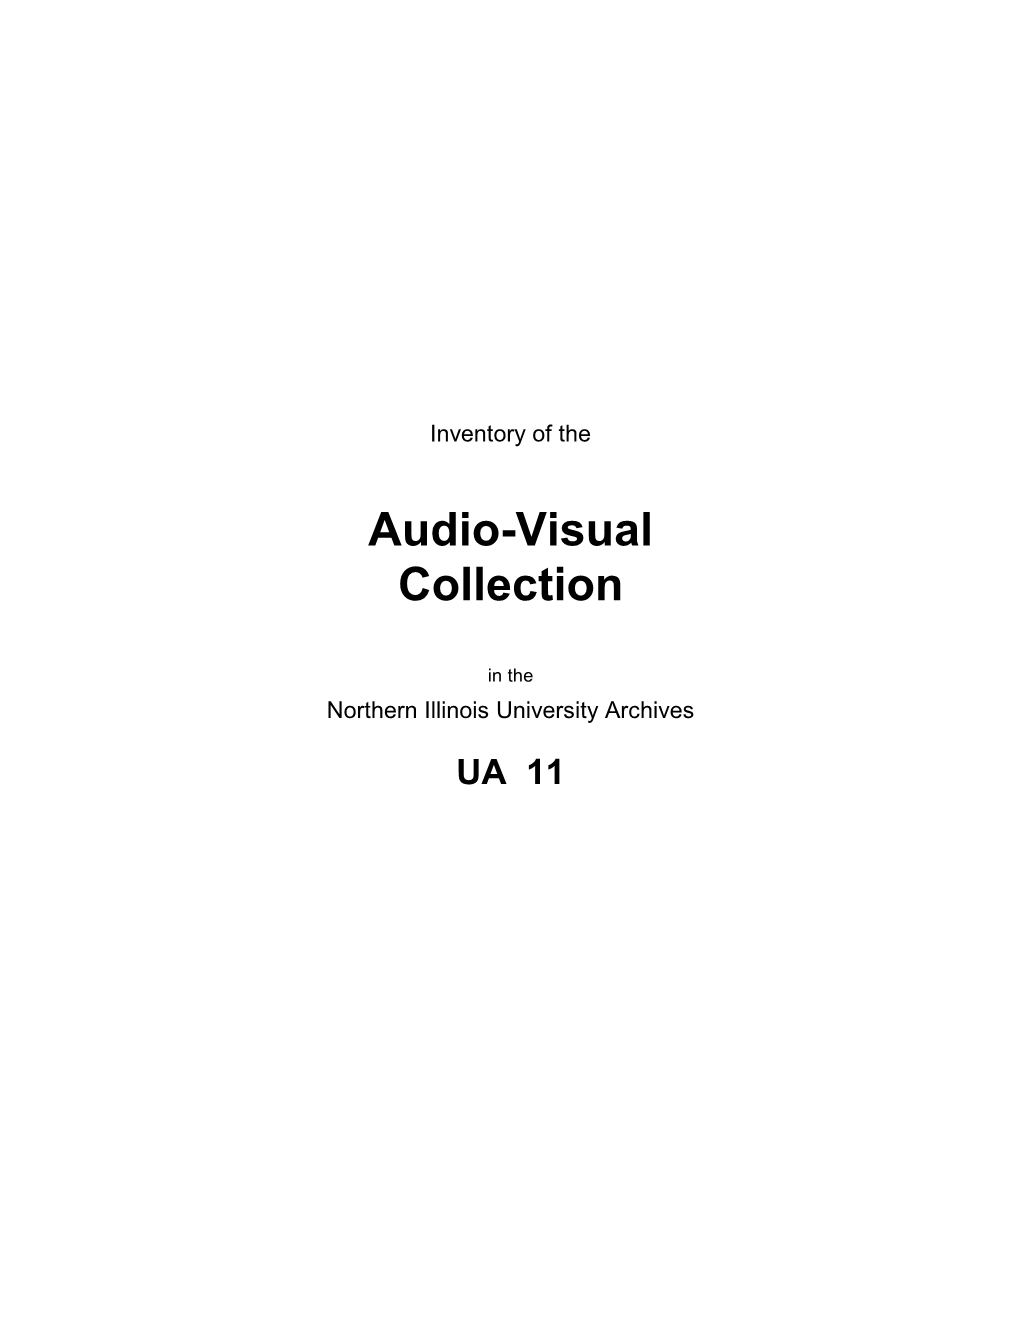 Audio-Visual Collection